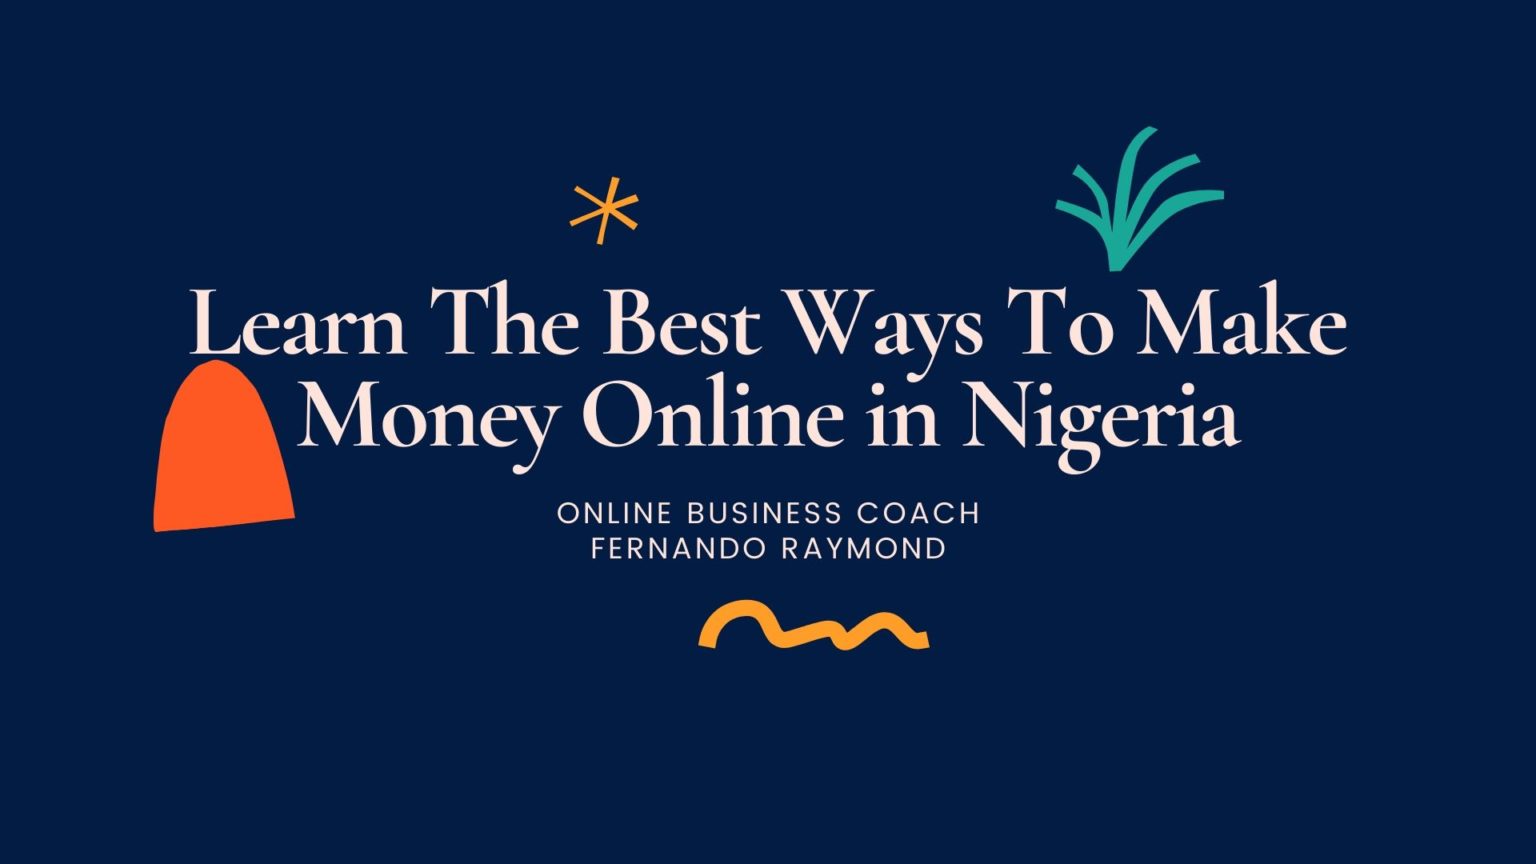 HOW TO MAKE MONEY ONLINE IN NIGERIA WITHOUT SPENDING A DIME